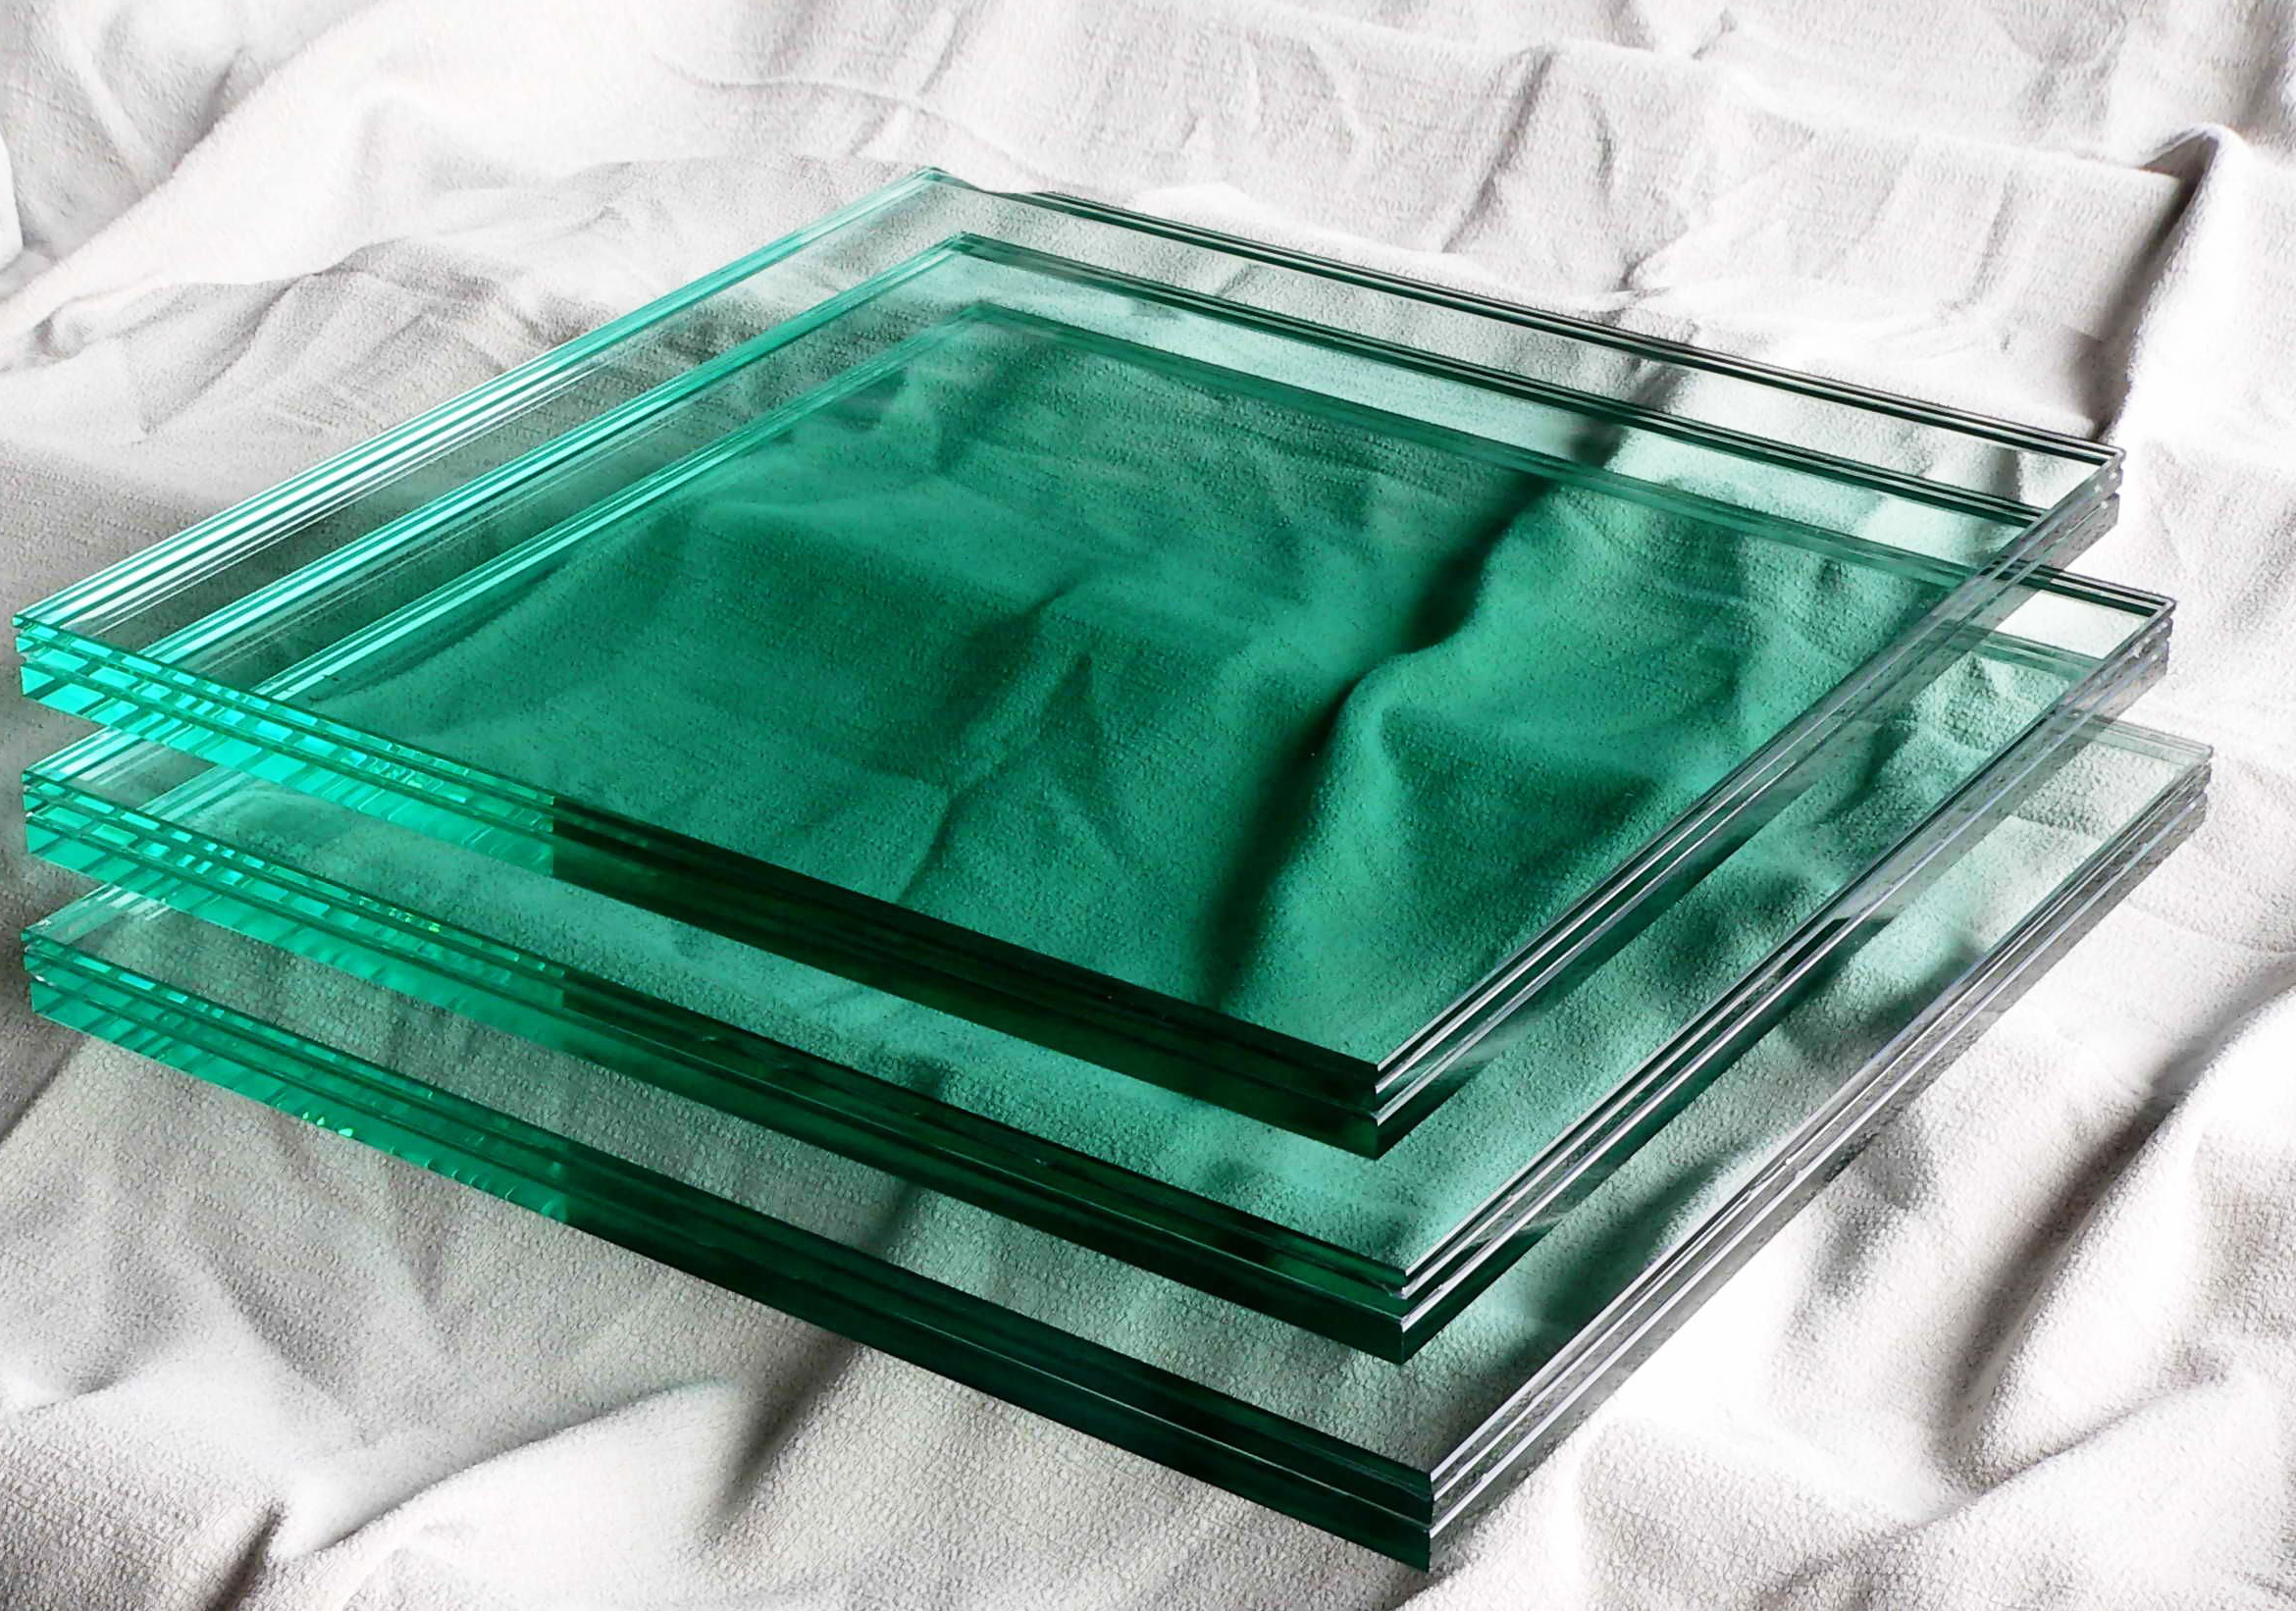 Multilayer Laminated glass